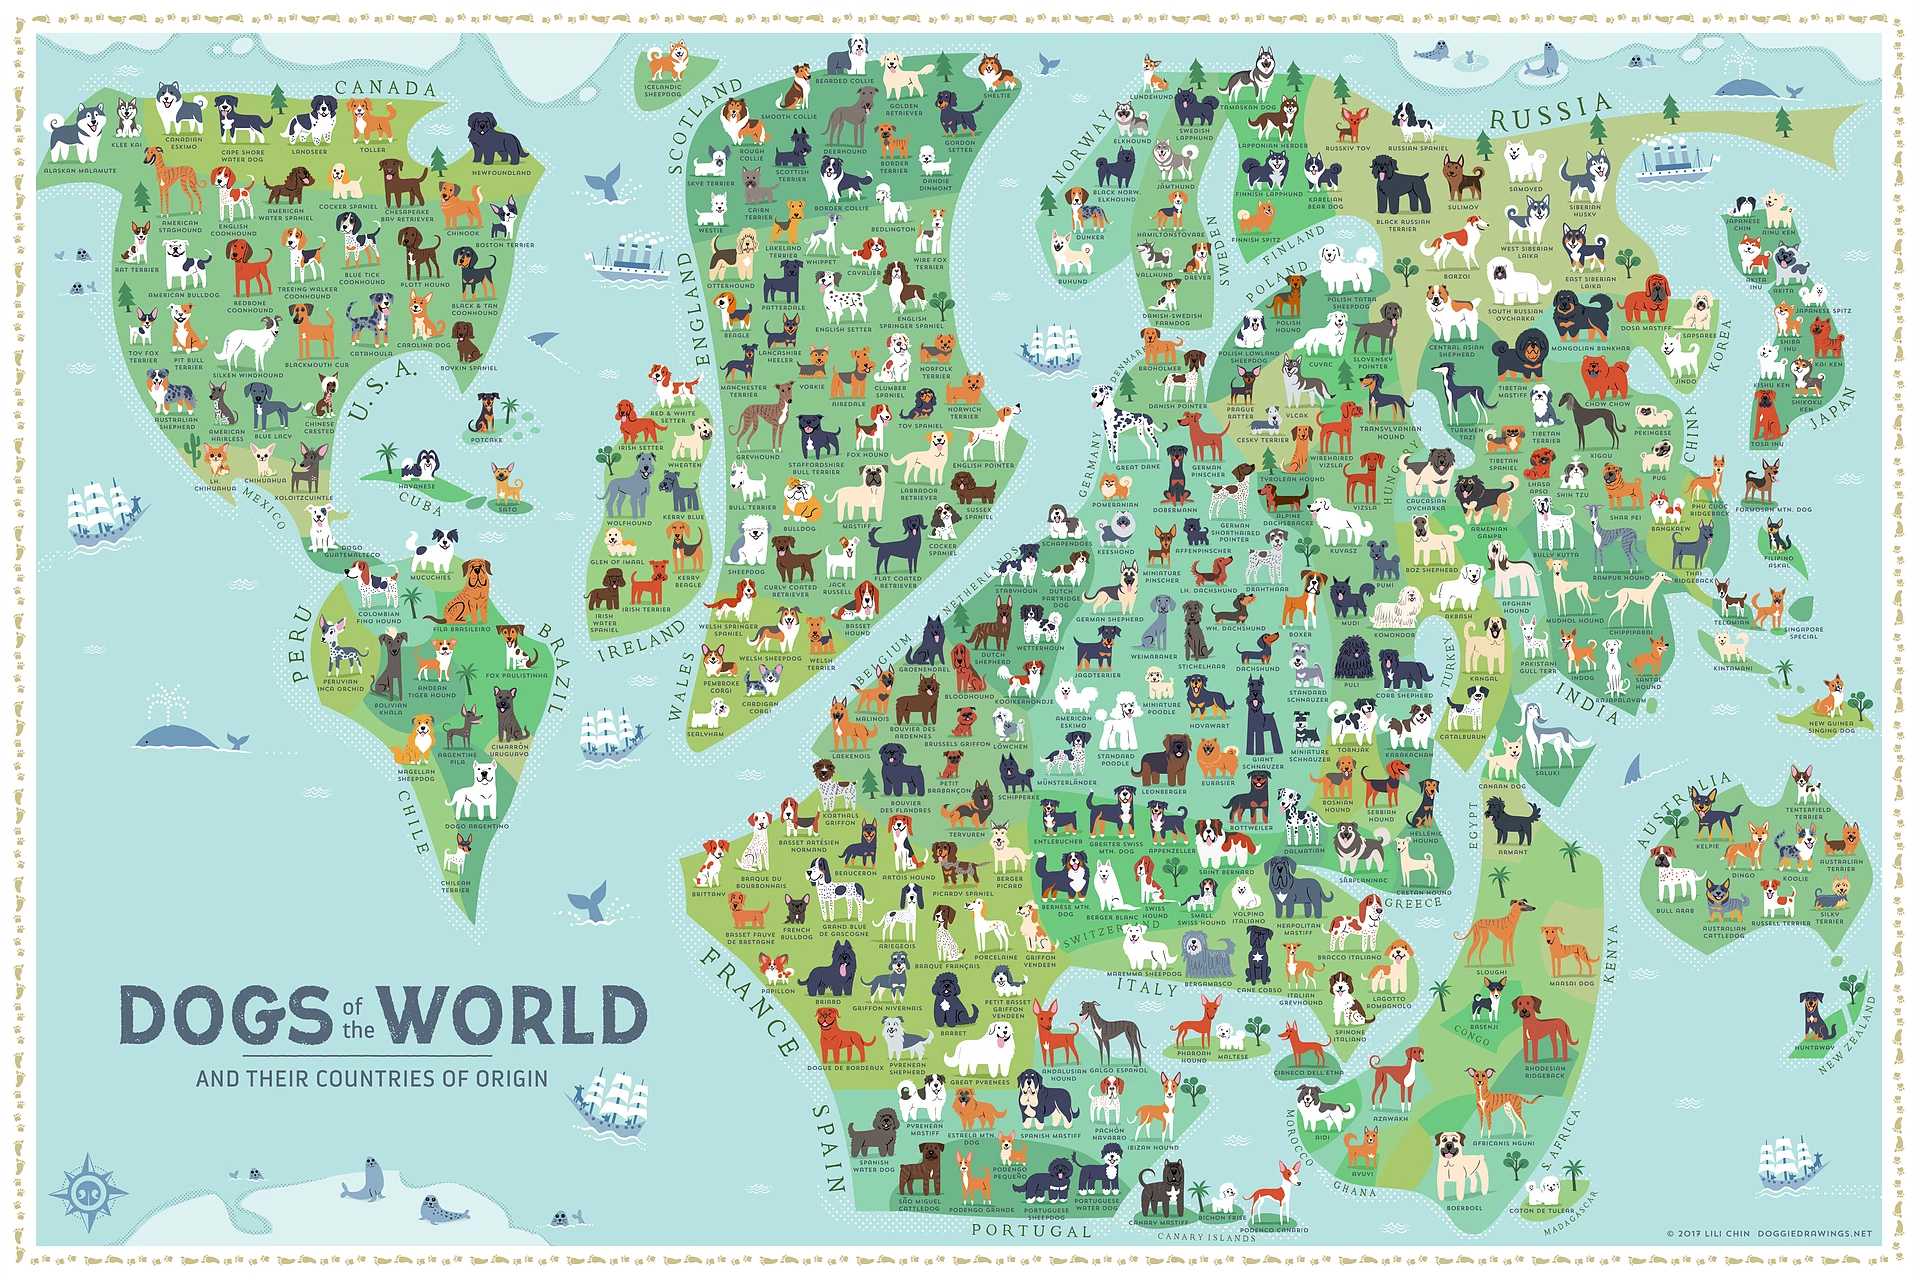 Dogs of the World Map by Lili Chin (@doggiedrawings)